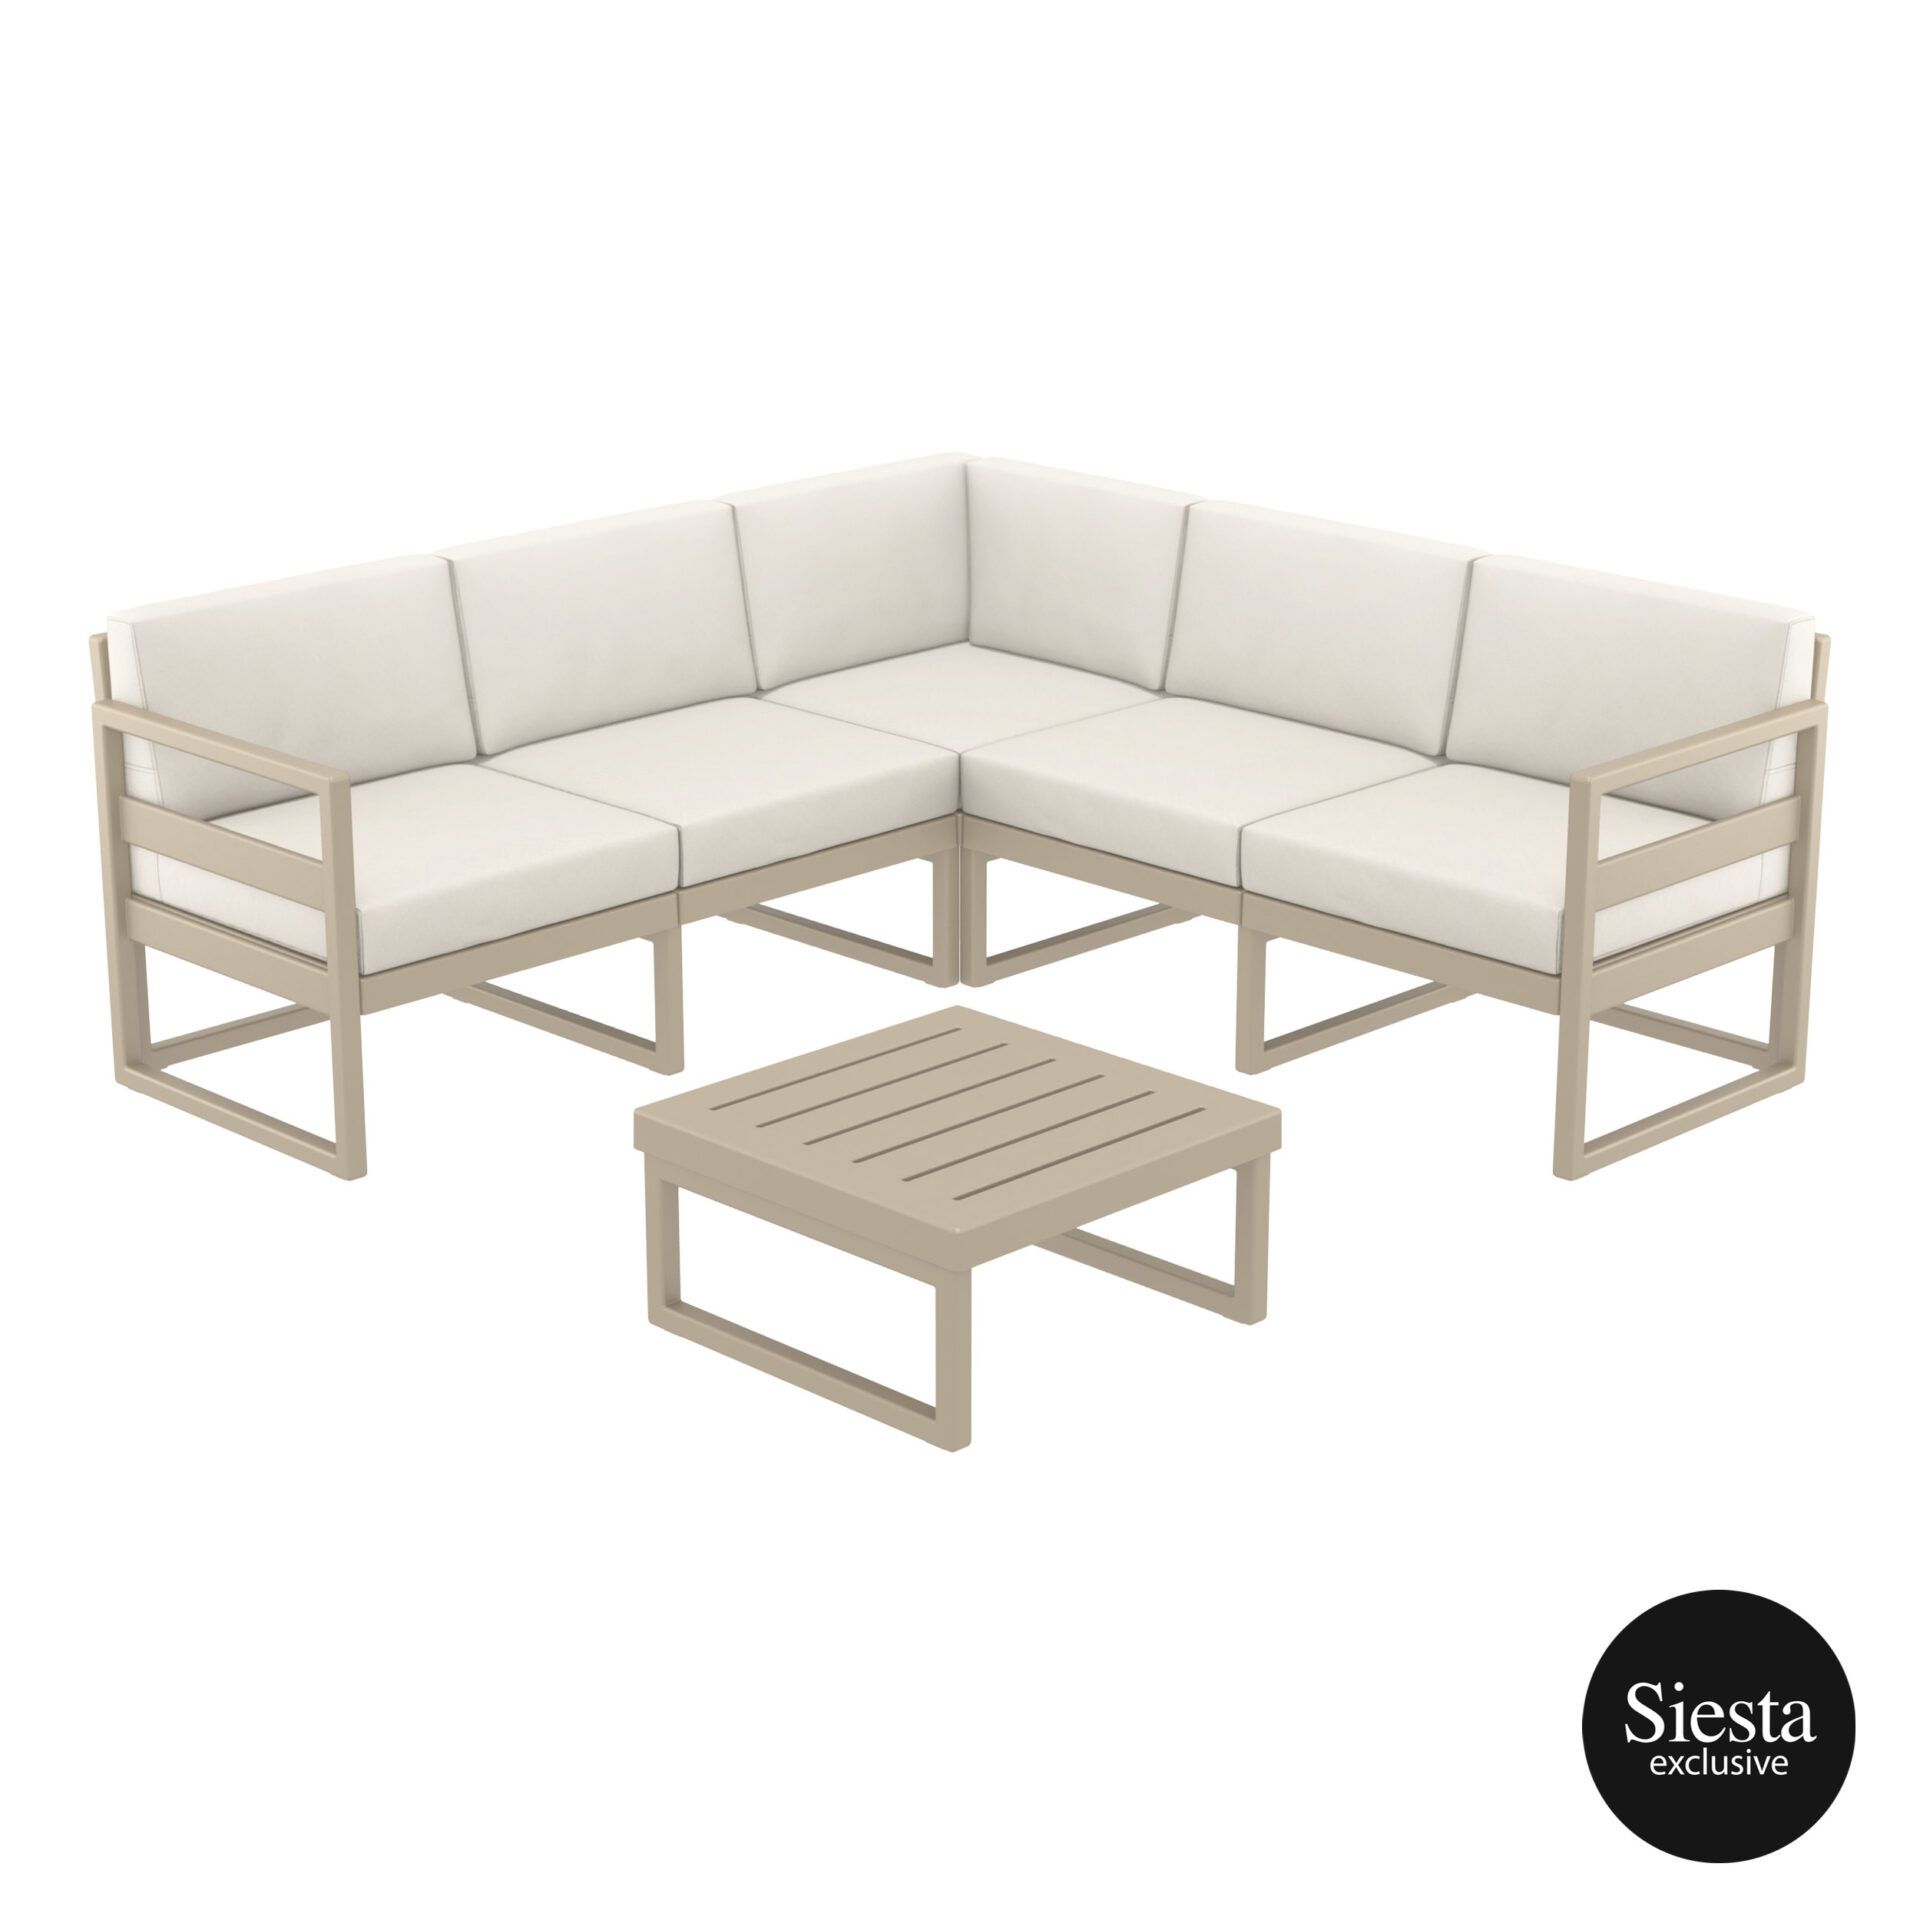 Mykonos Outdoor Corner Lounge colour TAUPE available to order now!